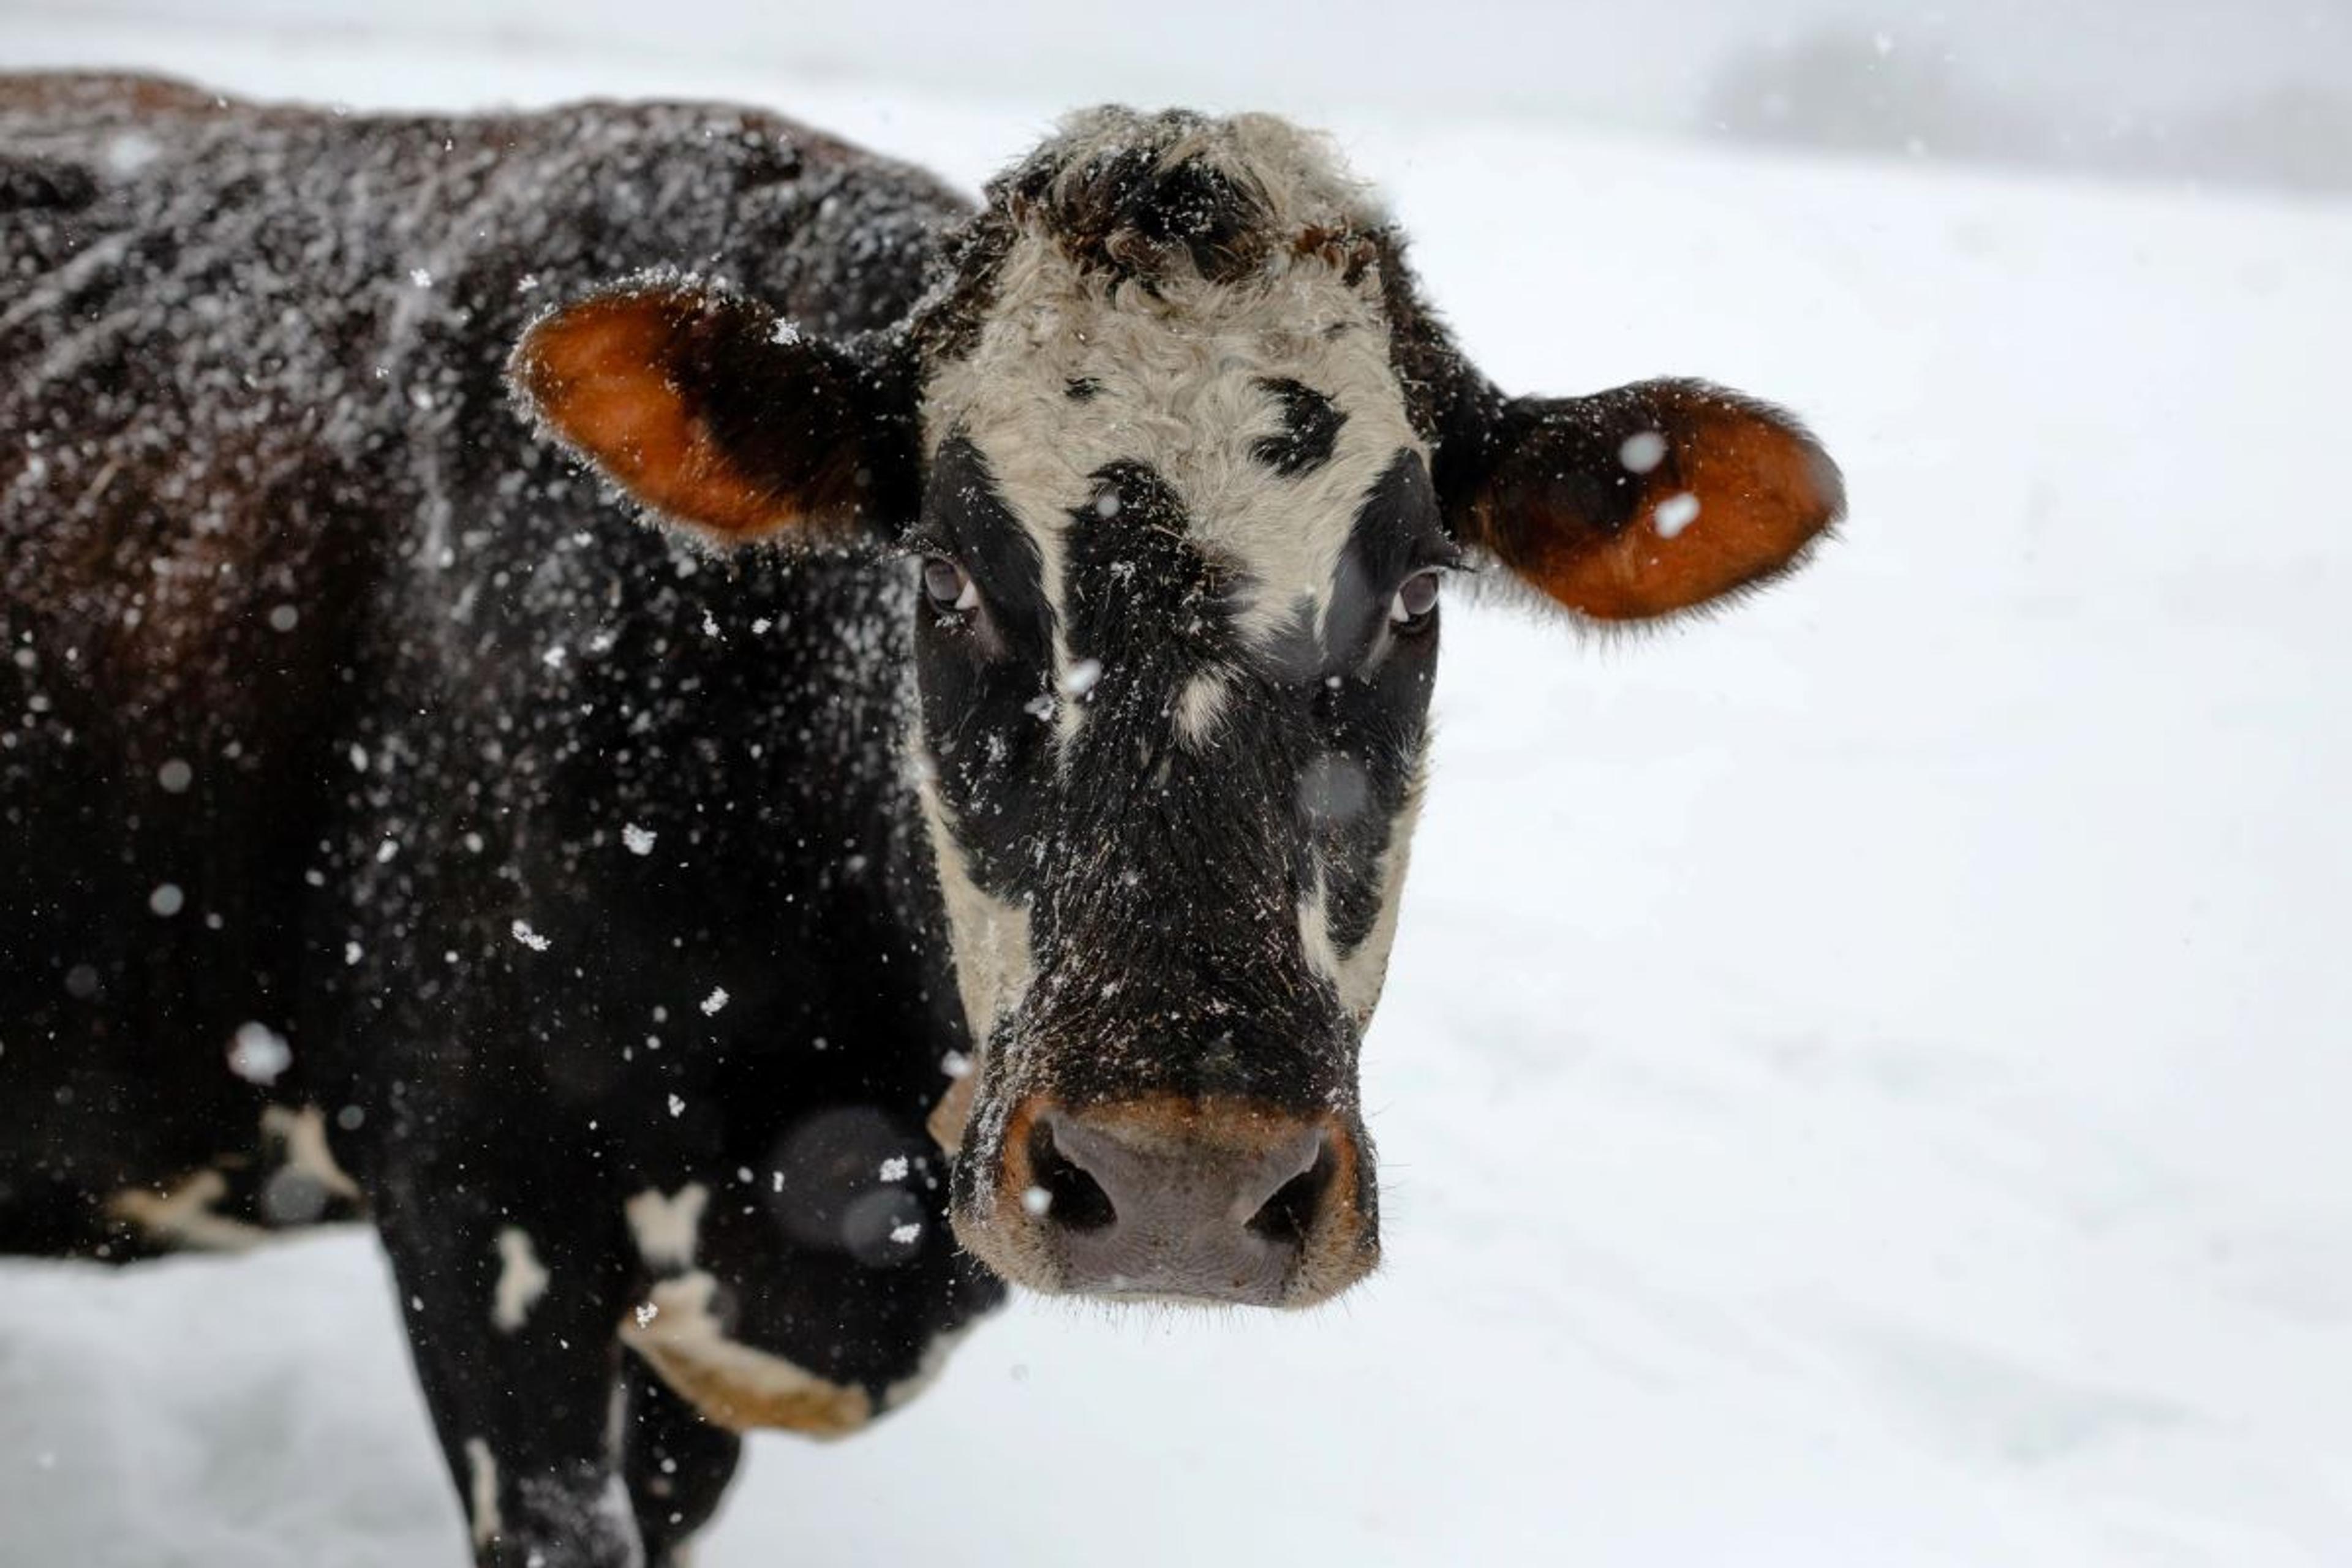 Snow falls on a cow on a cold day.